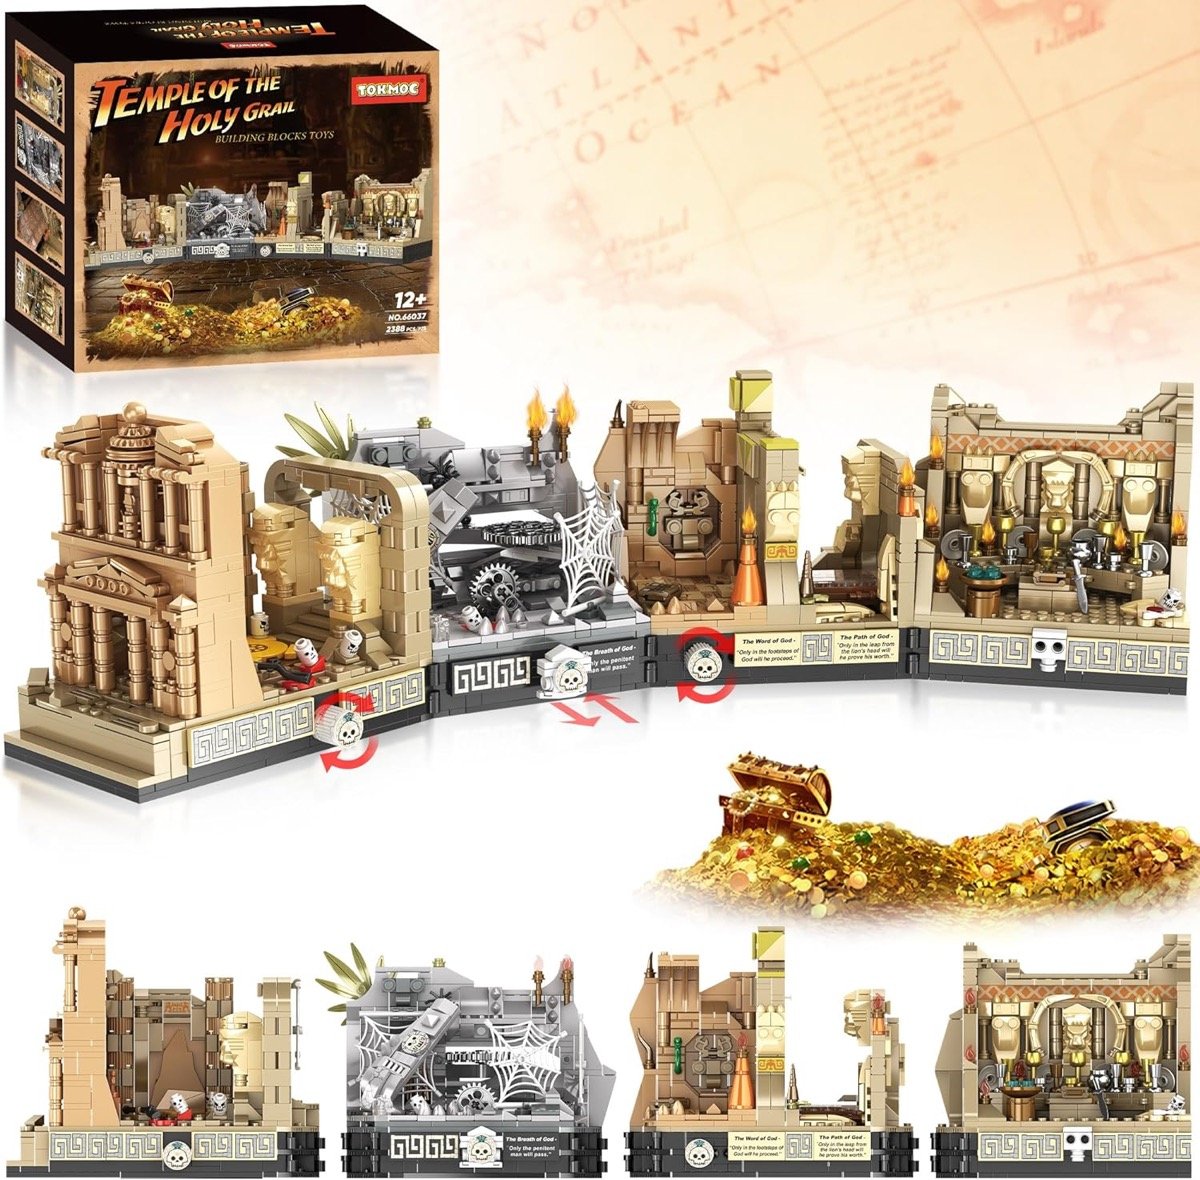 A LEGO model of the "Indiana Jones" 5-in-1 Temple building set